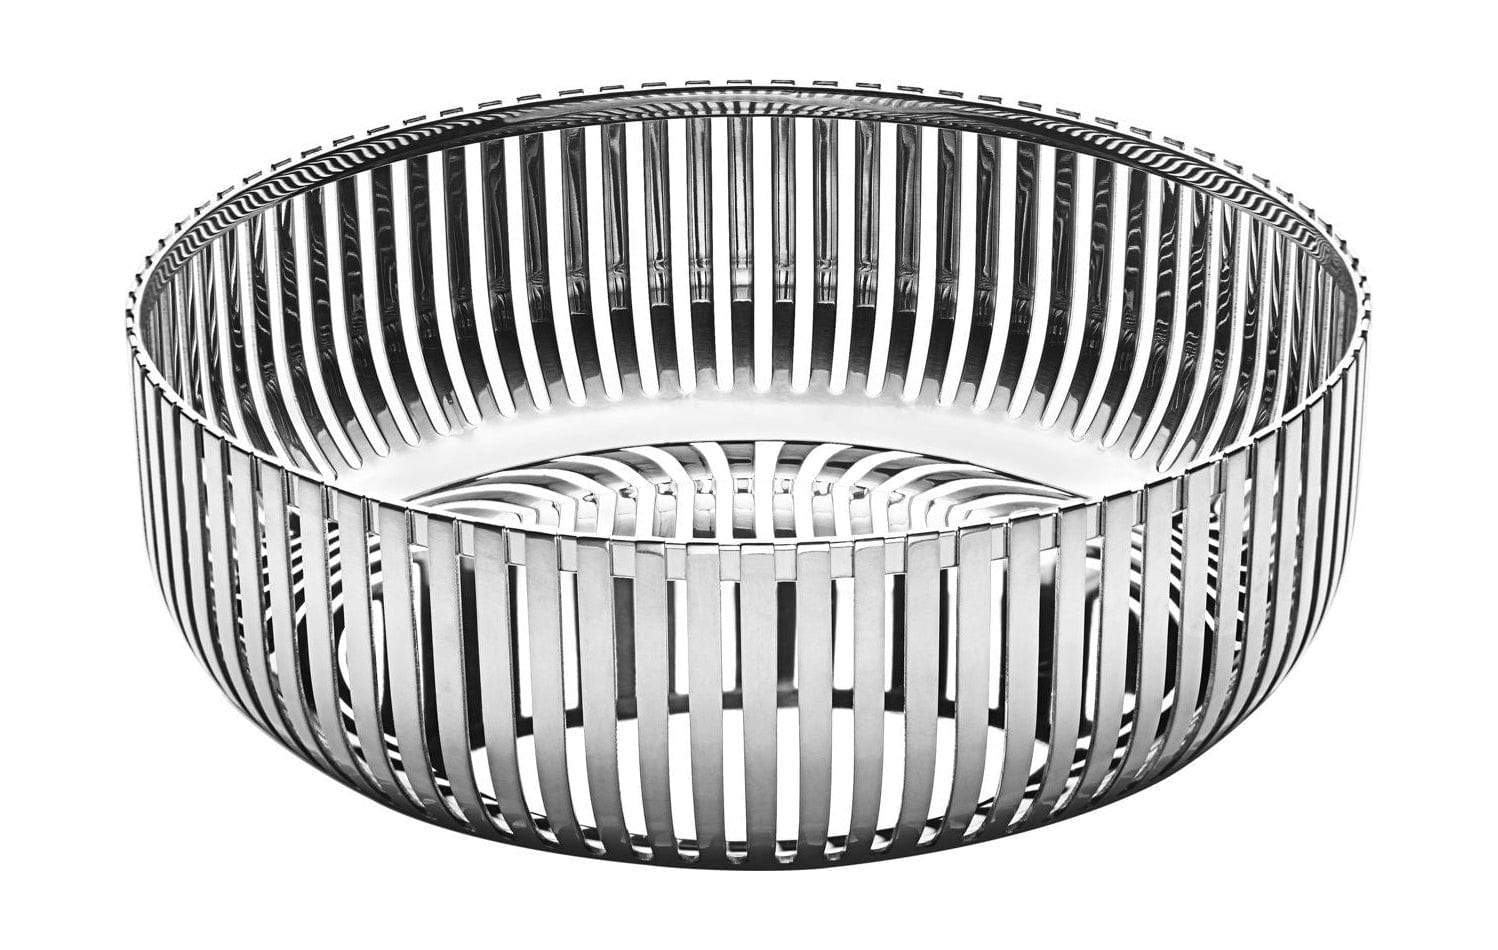 Alessi Pch02 Basket Bowl Made Of Stainless Steel, ø15 Cm